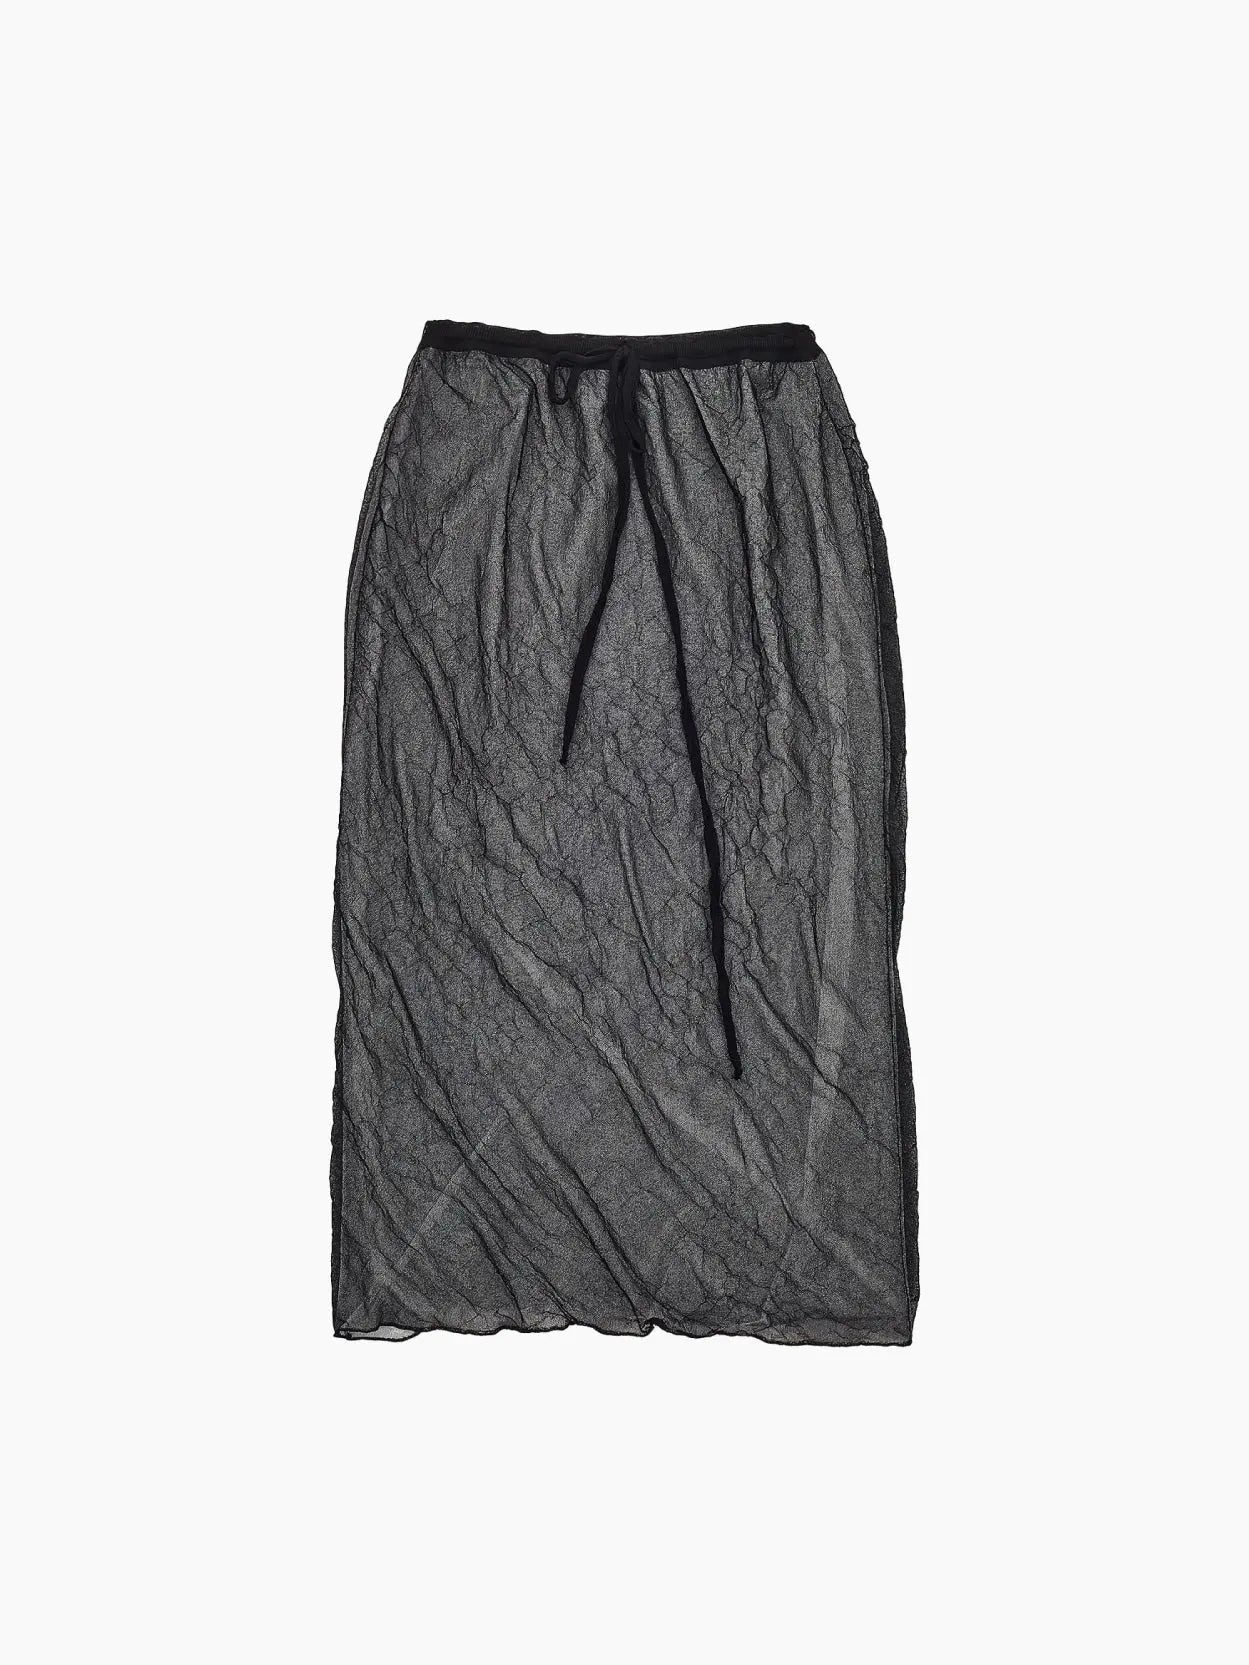 A sheer, black mesh skirt with a drawstring waistband, displayed flat against a white background. The skirt has a crinkled texture and a straight cut, extending to knee length. Discover this chic piece at BassalStore in Barcelona. This is the Hankachi Skirt Black by Rus.